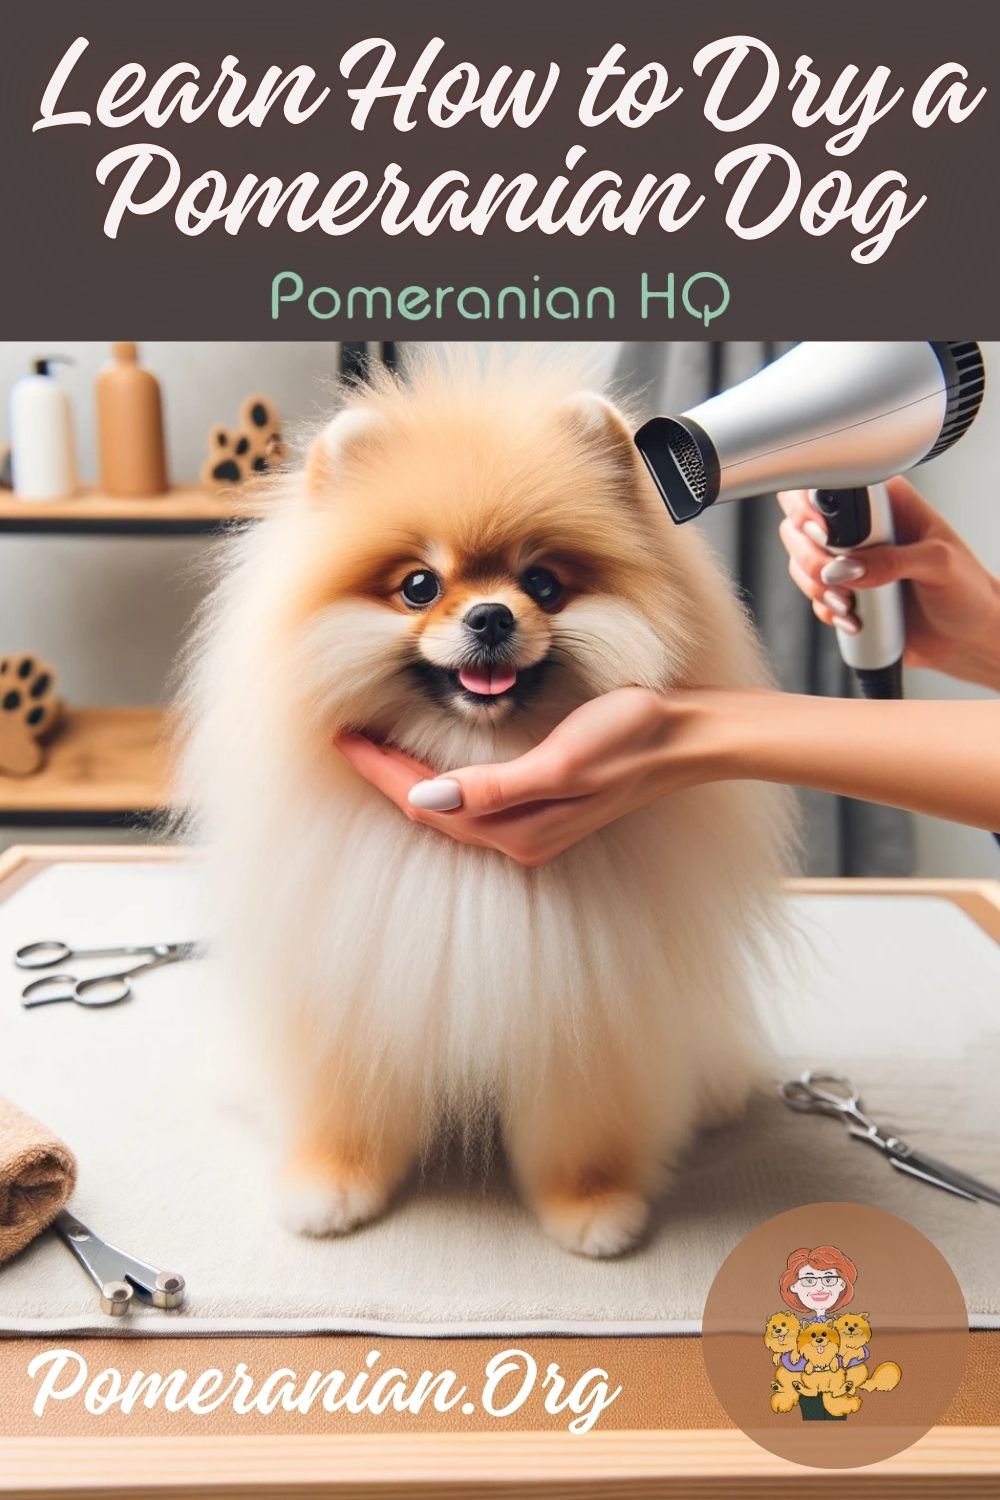 Learn How to Dry a Pomeranian Dog